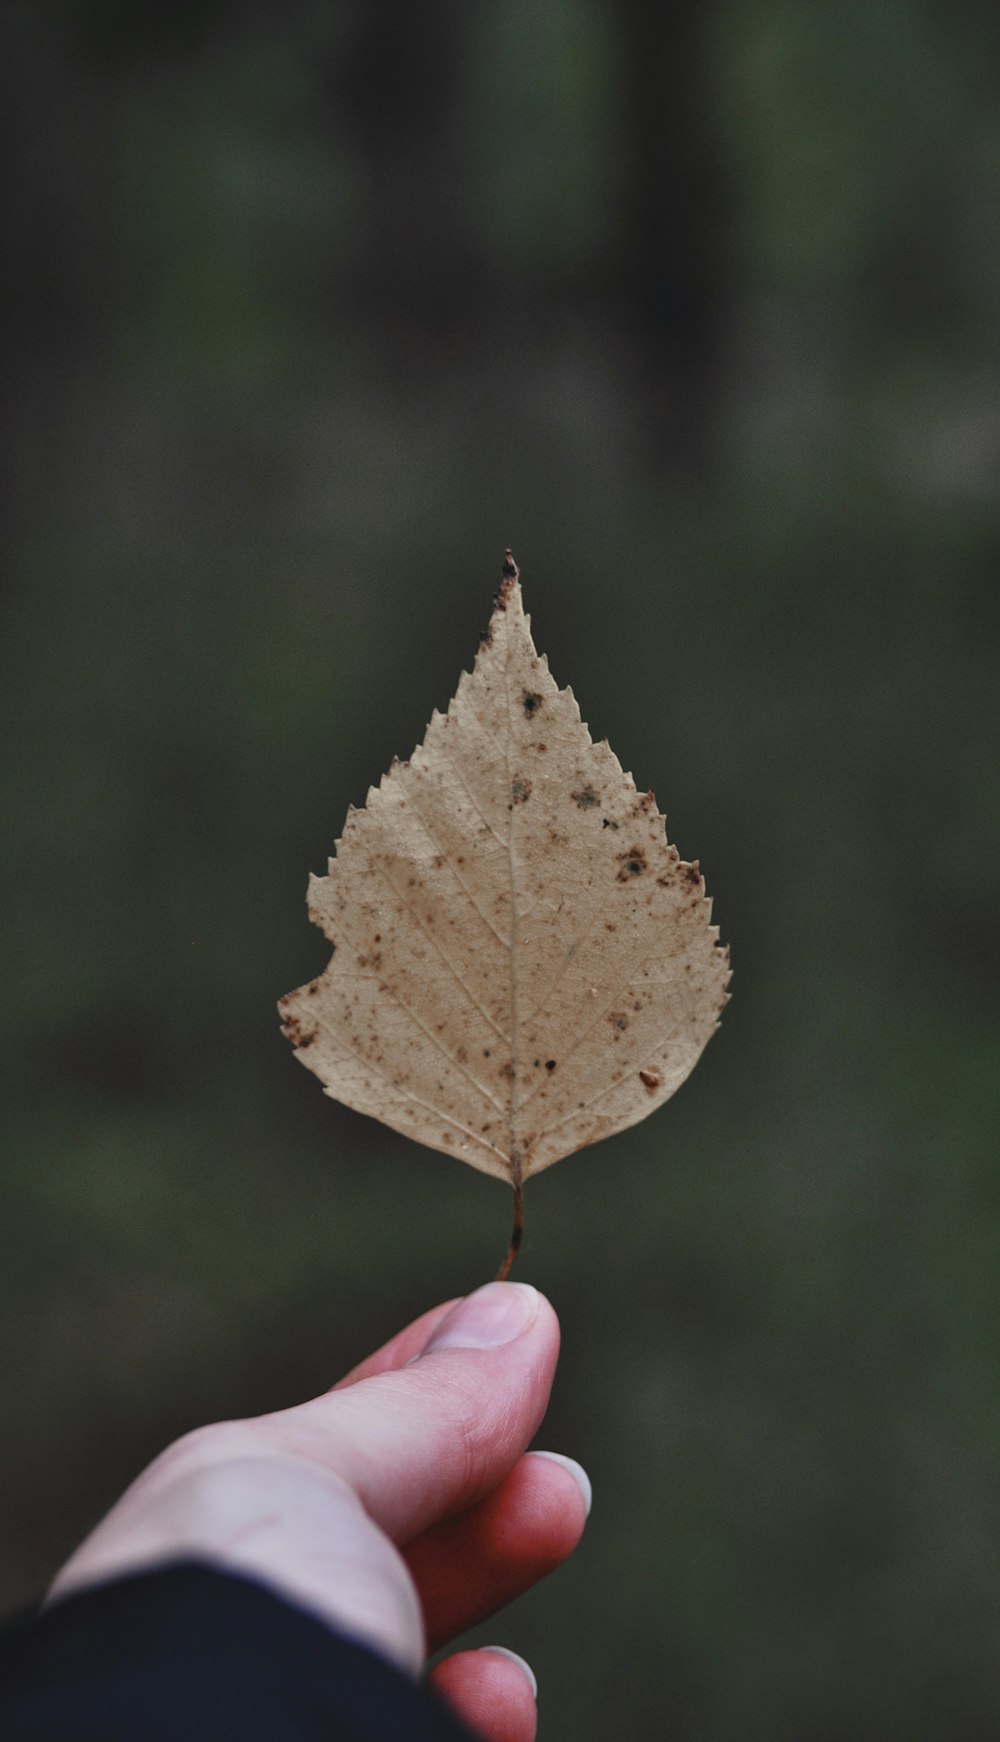 a hand holding a leaf